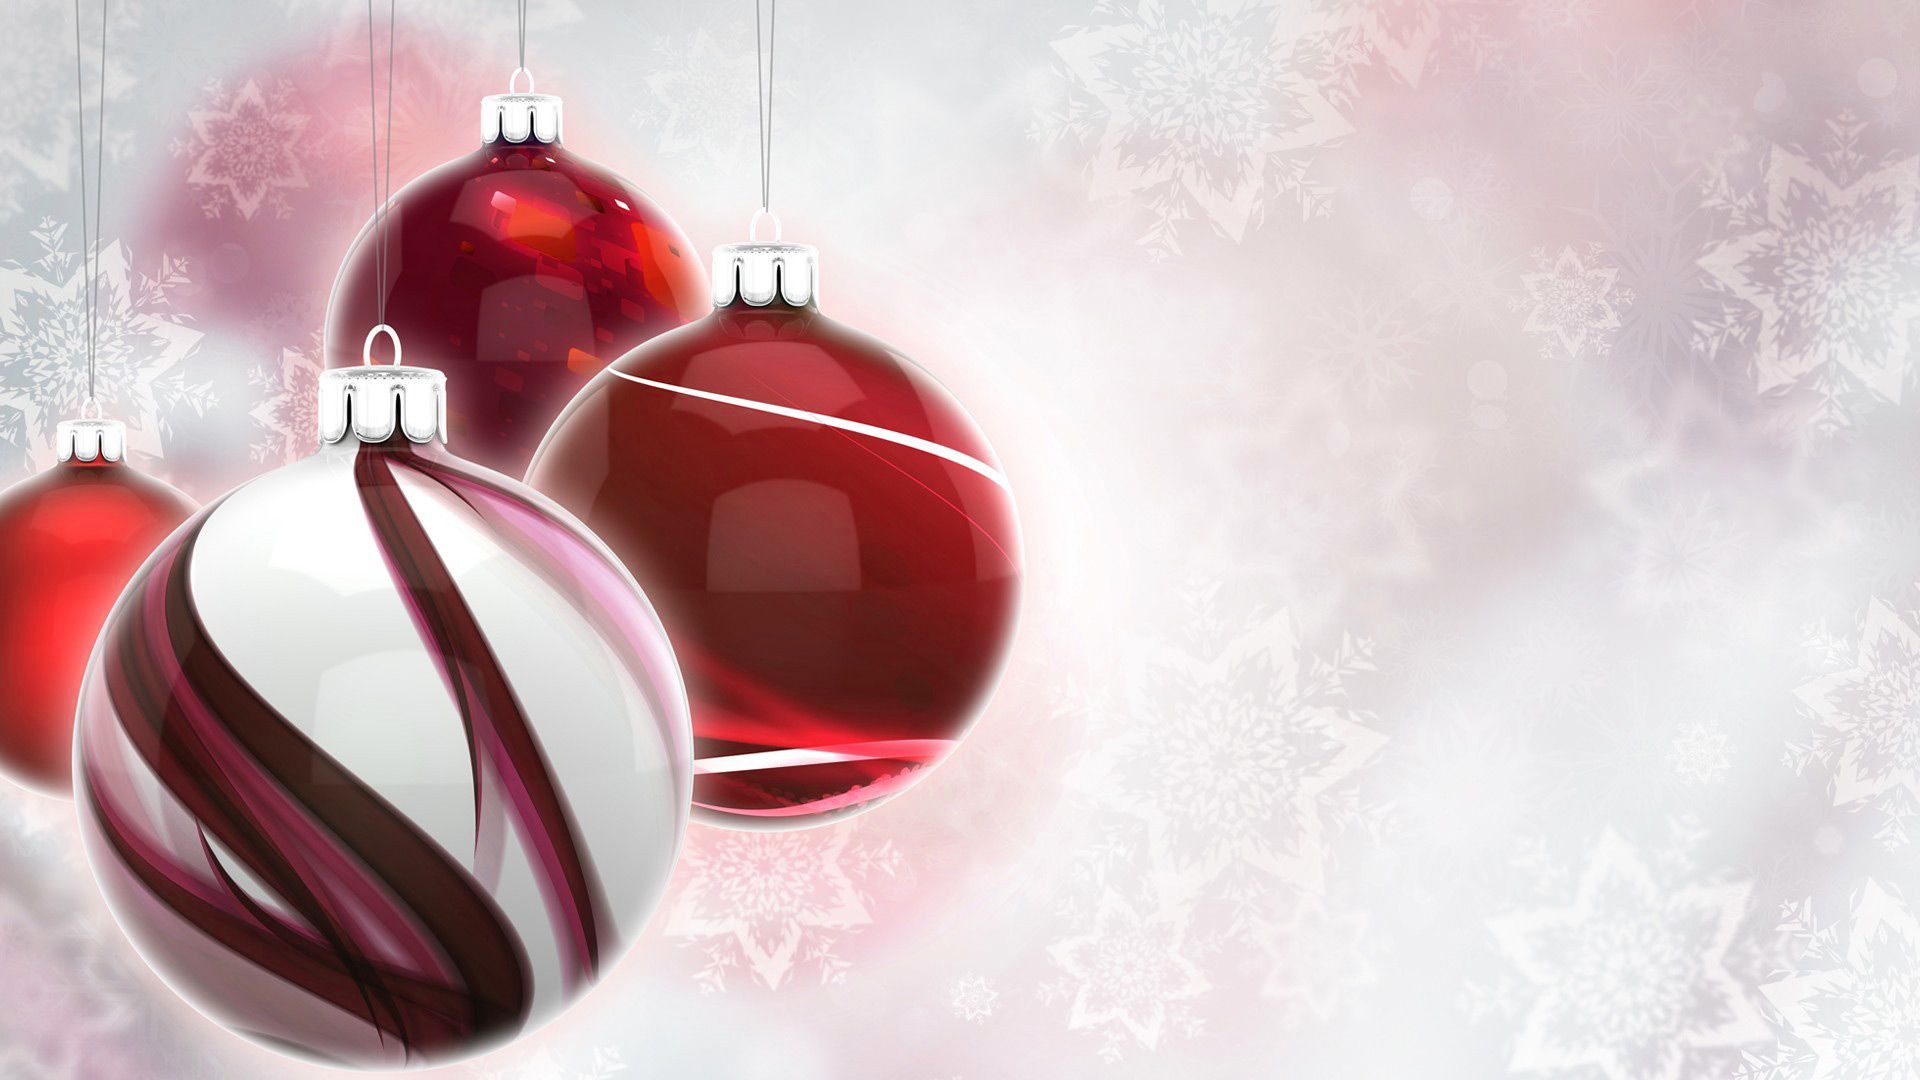 White Christmas Background With Christmas Balls Quality Image And Transparent PNG Free Clipart